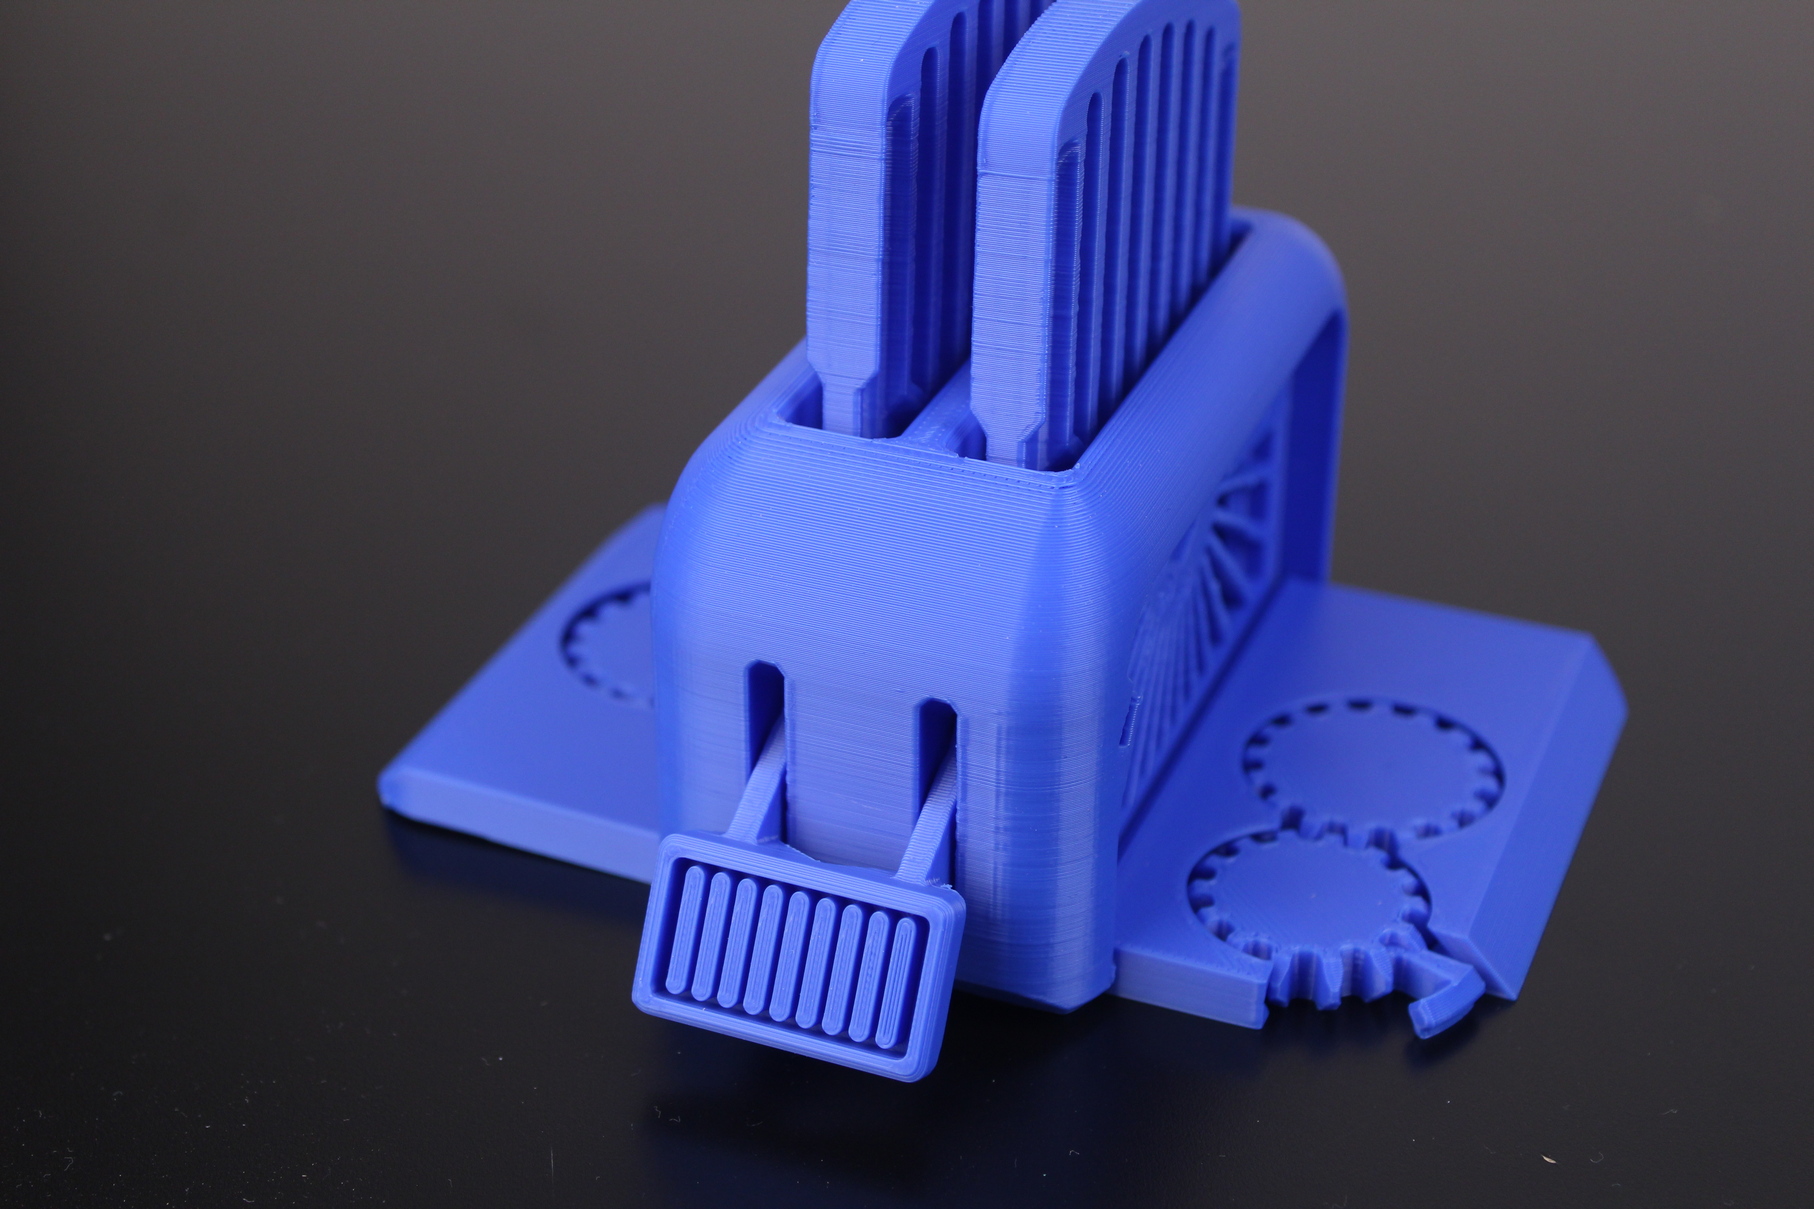 Torture Toaster printed on Voxelab Aries 1 | Voxelab Aries Review: A Worthy Upgrade for the Aquila?